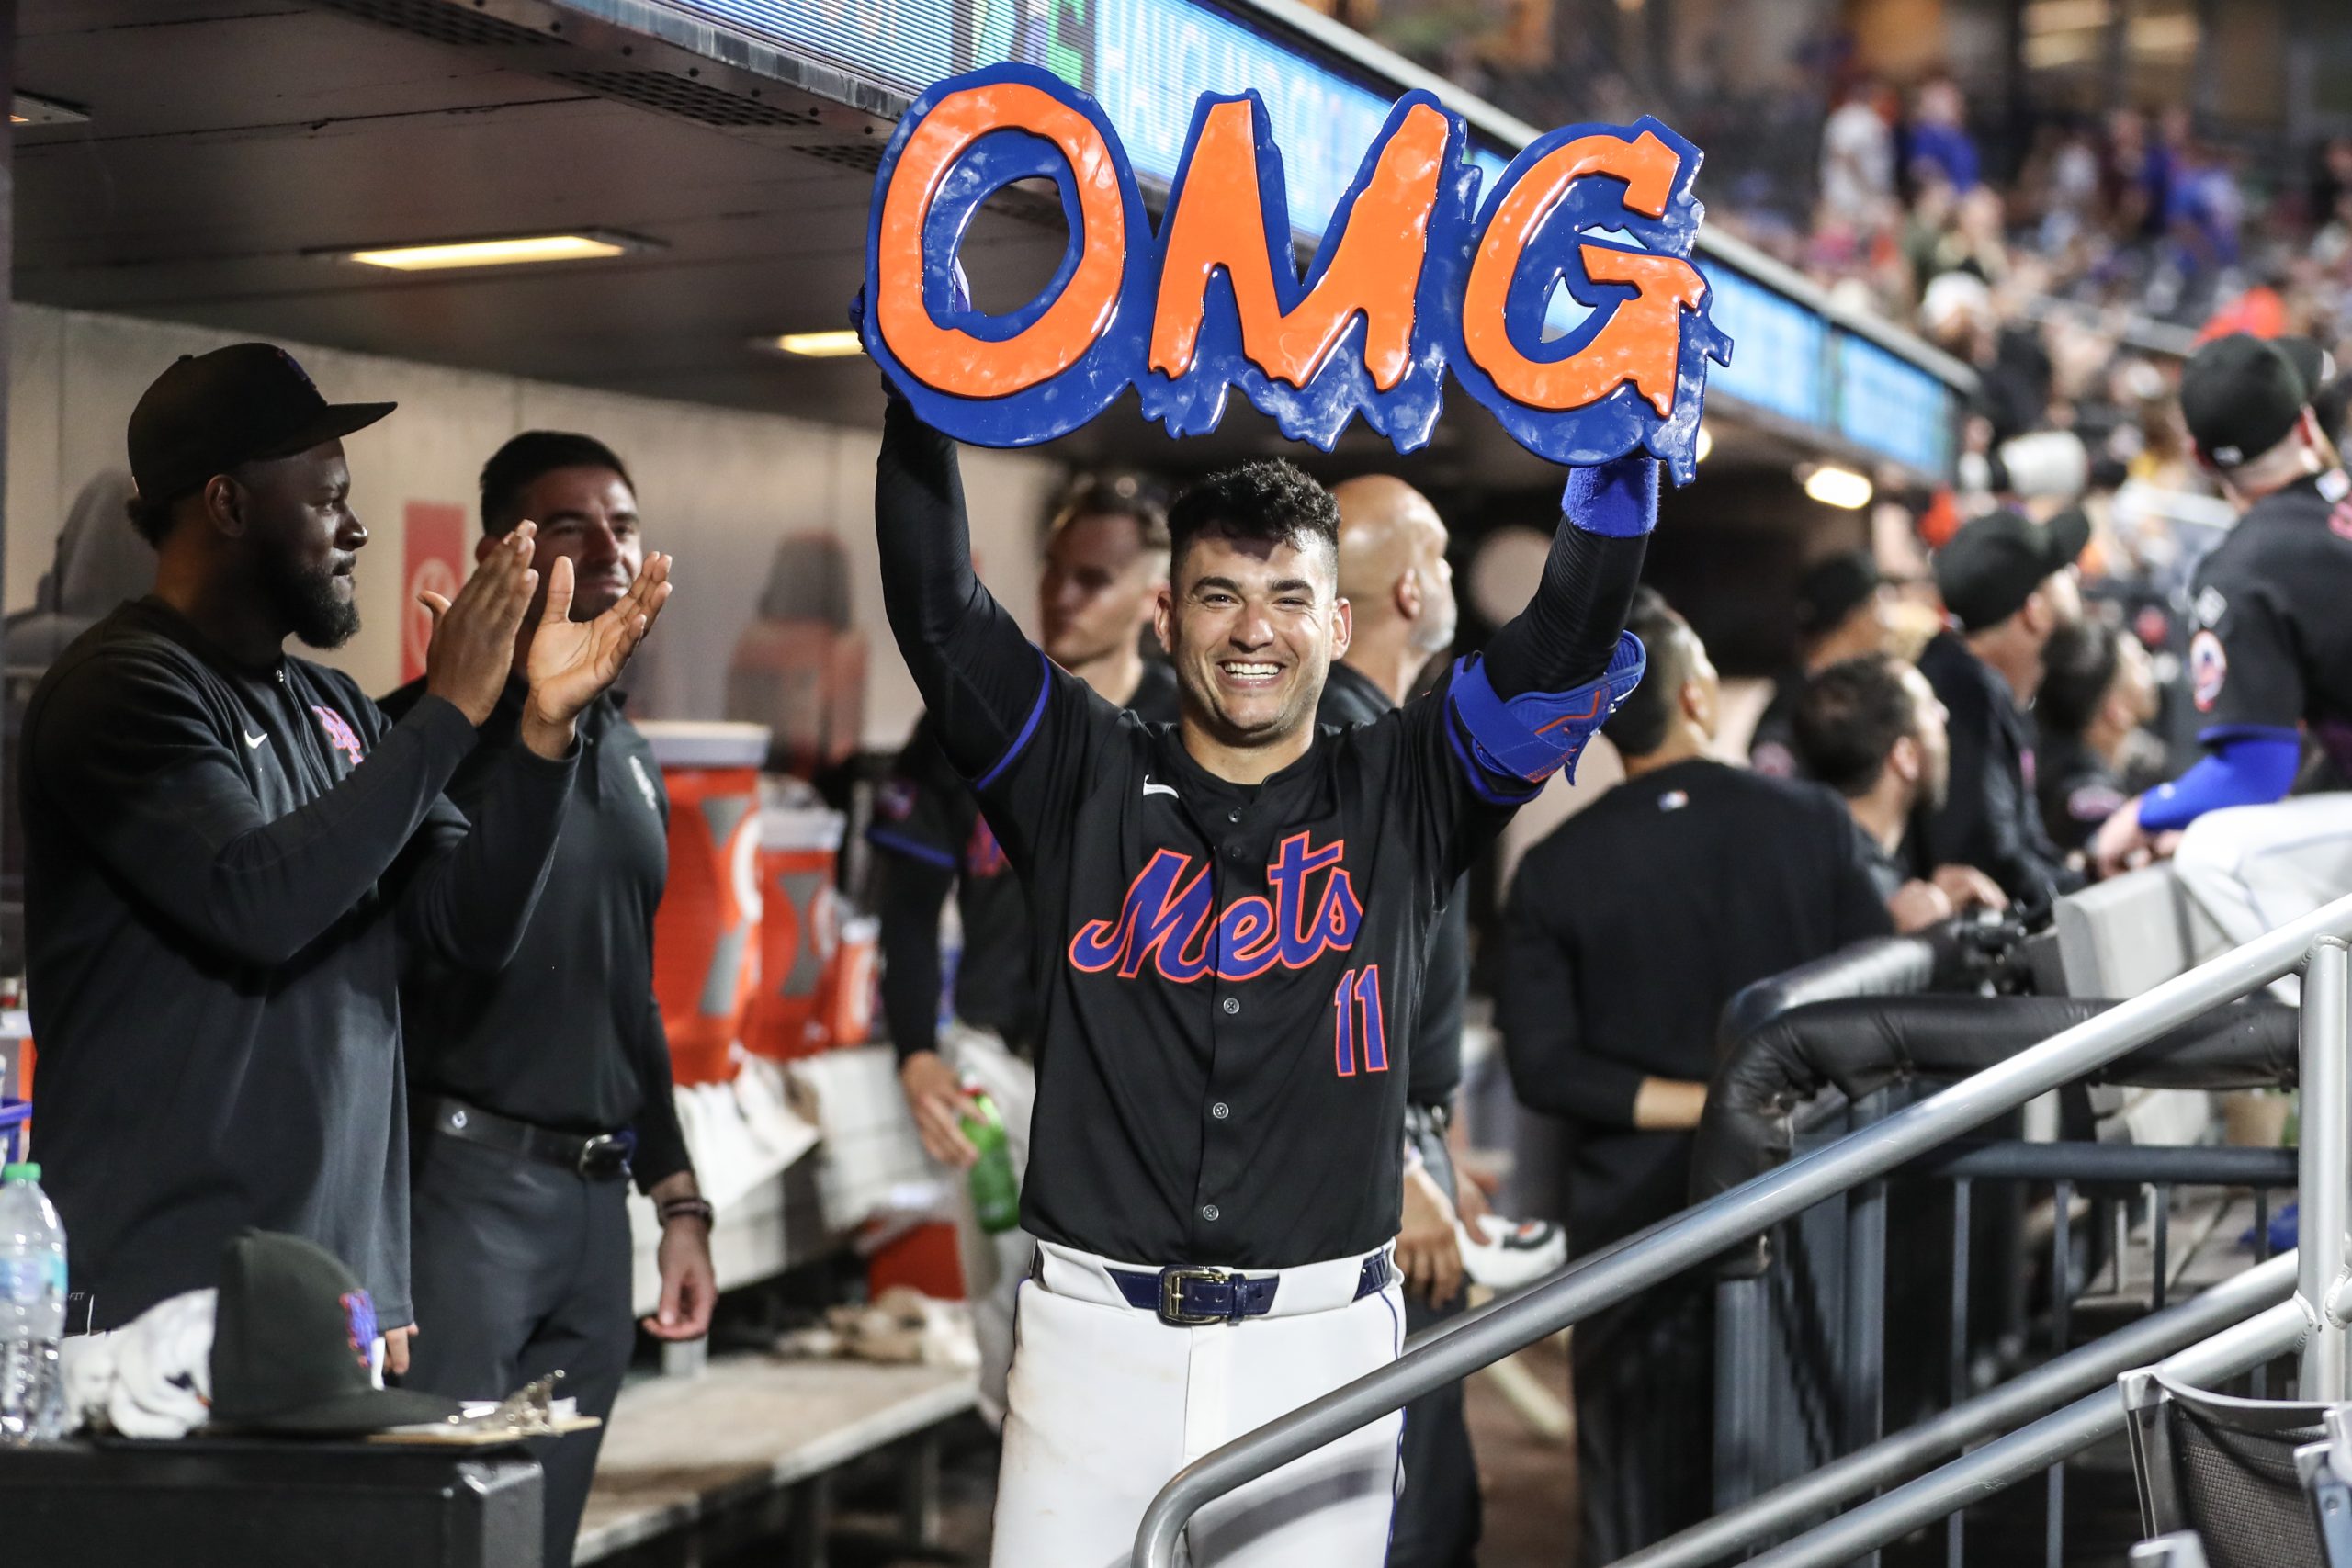 José Iglesias of the Mets sings the hit “OMG” at the All-Star Game